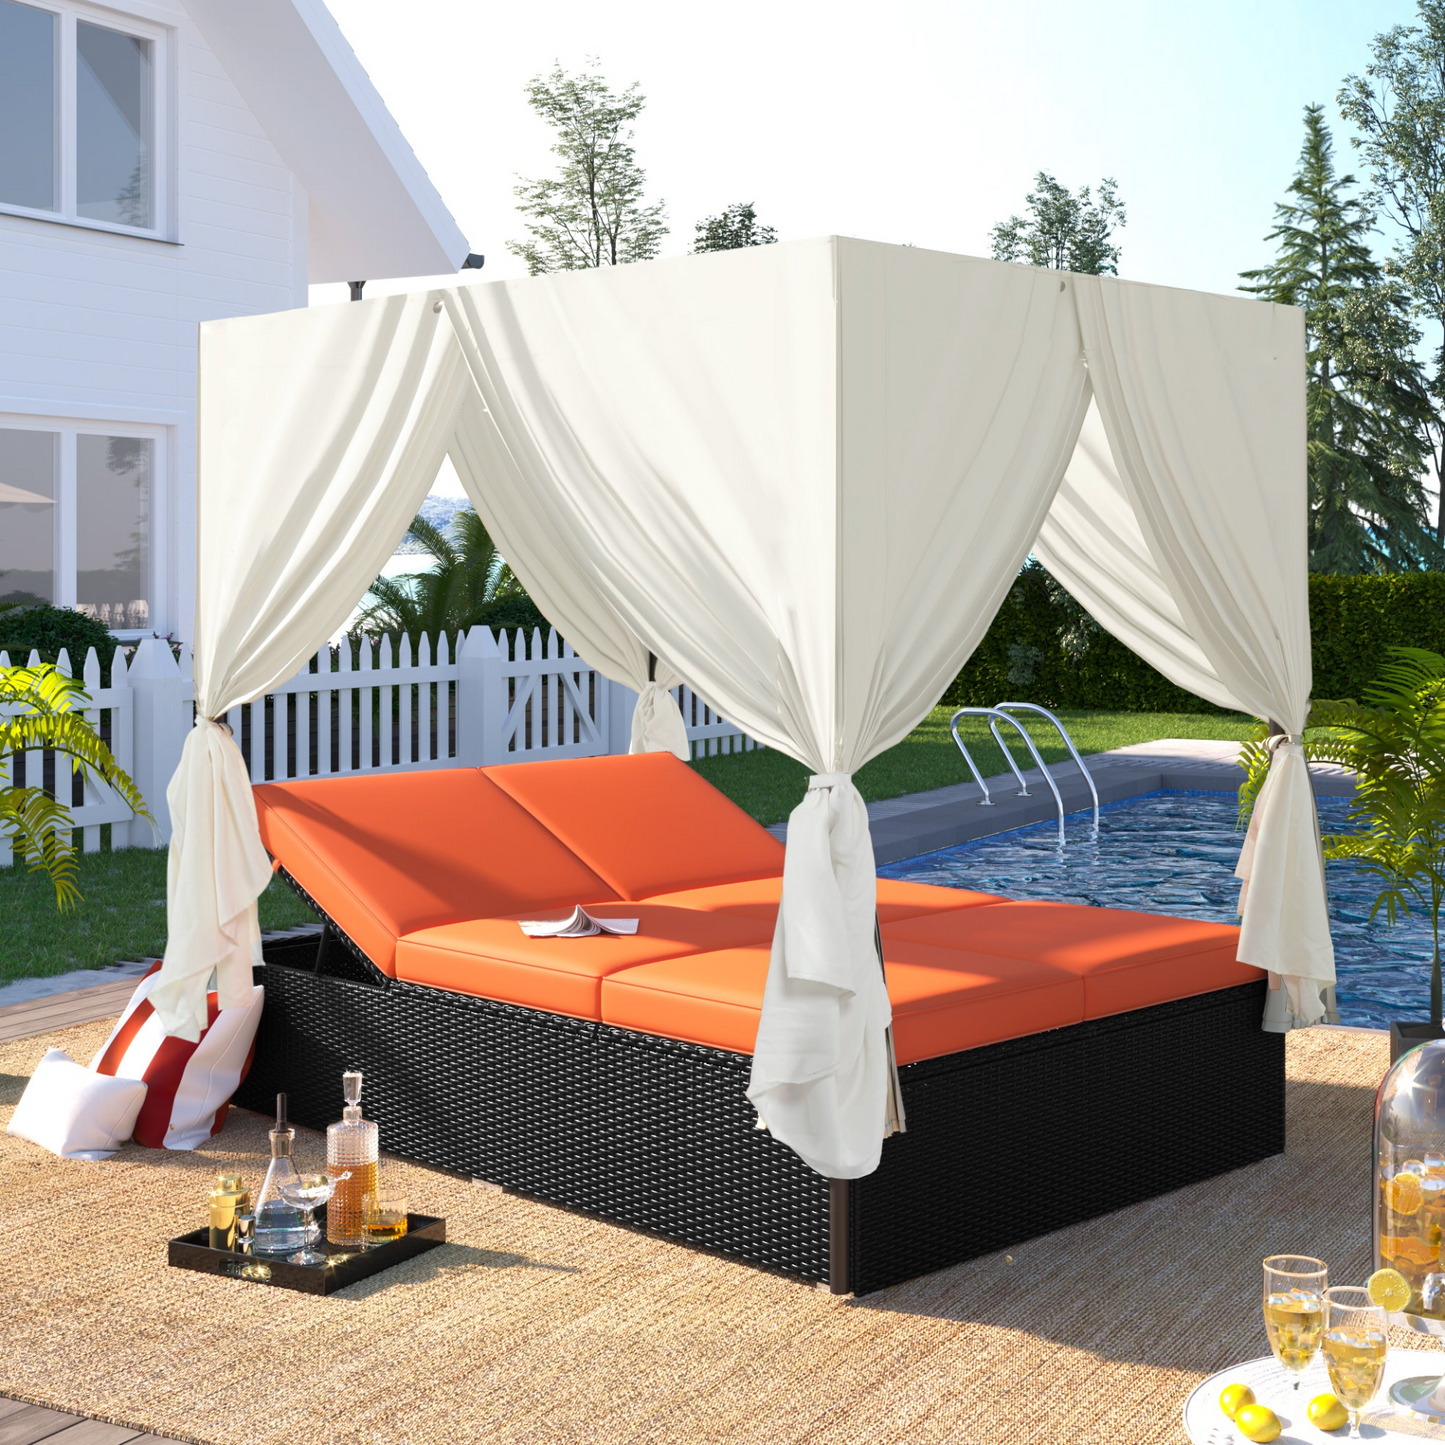 U_STYLE Outdoor Patio Wicker Sunbed Daybed with Cushions, Adjustable Seats